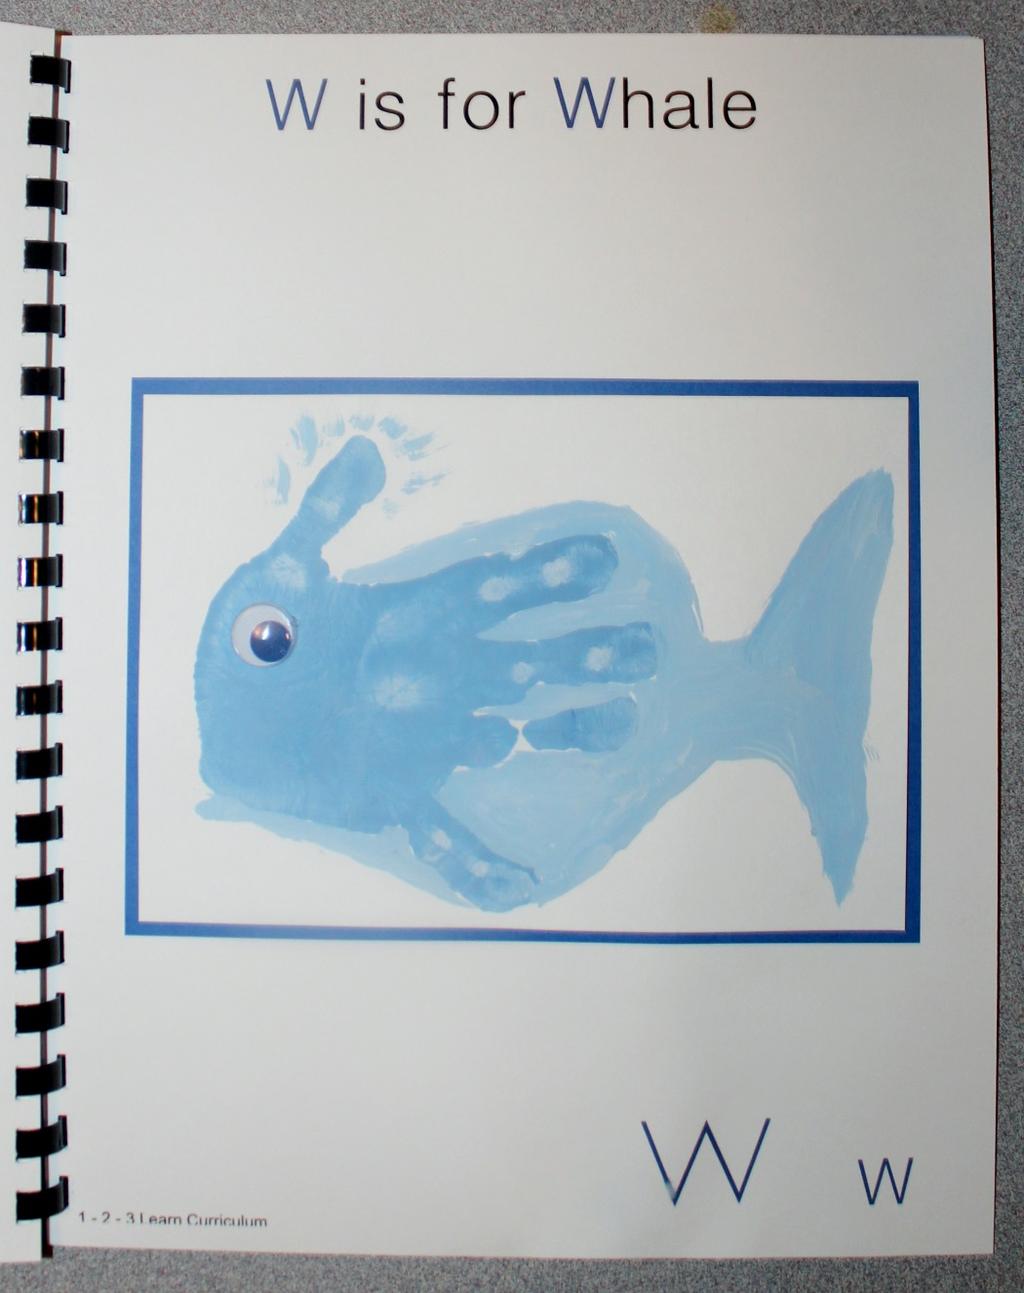 W is for Whale Paint the child s hand a light blue. (Mix blue with a few dots of white to get the desired color). Place on white card stock.